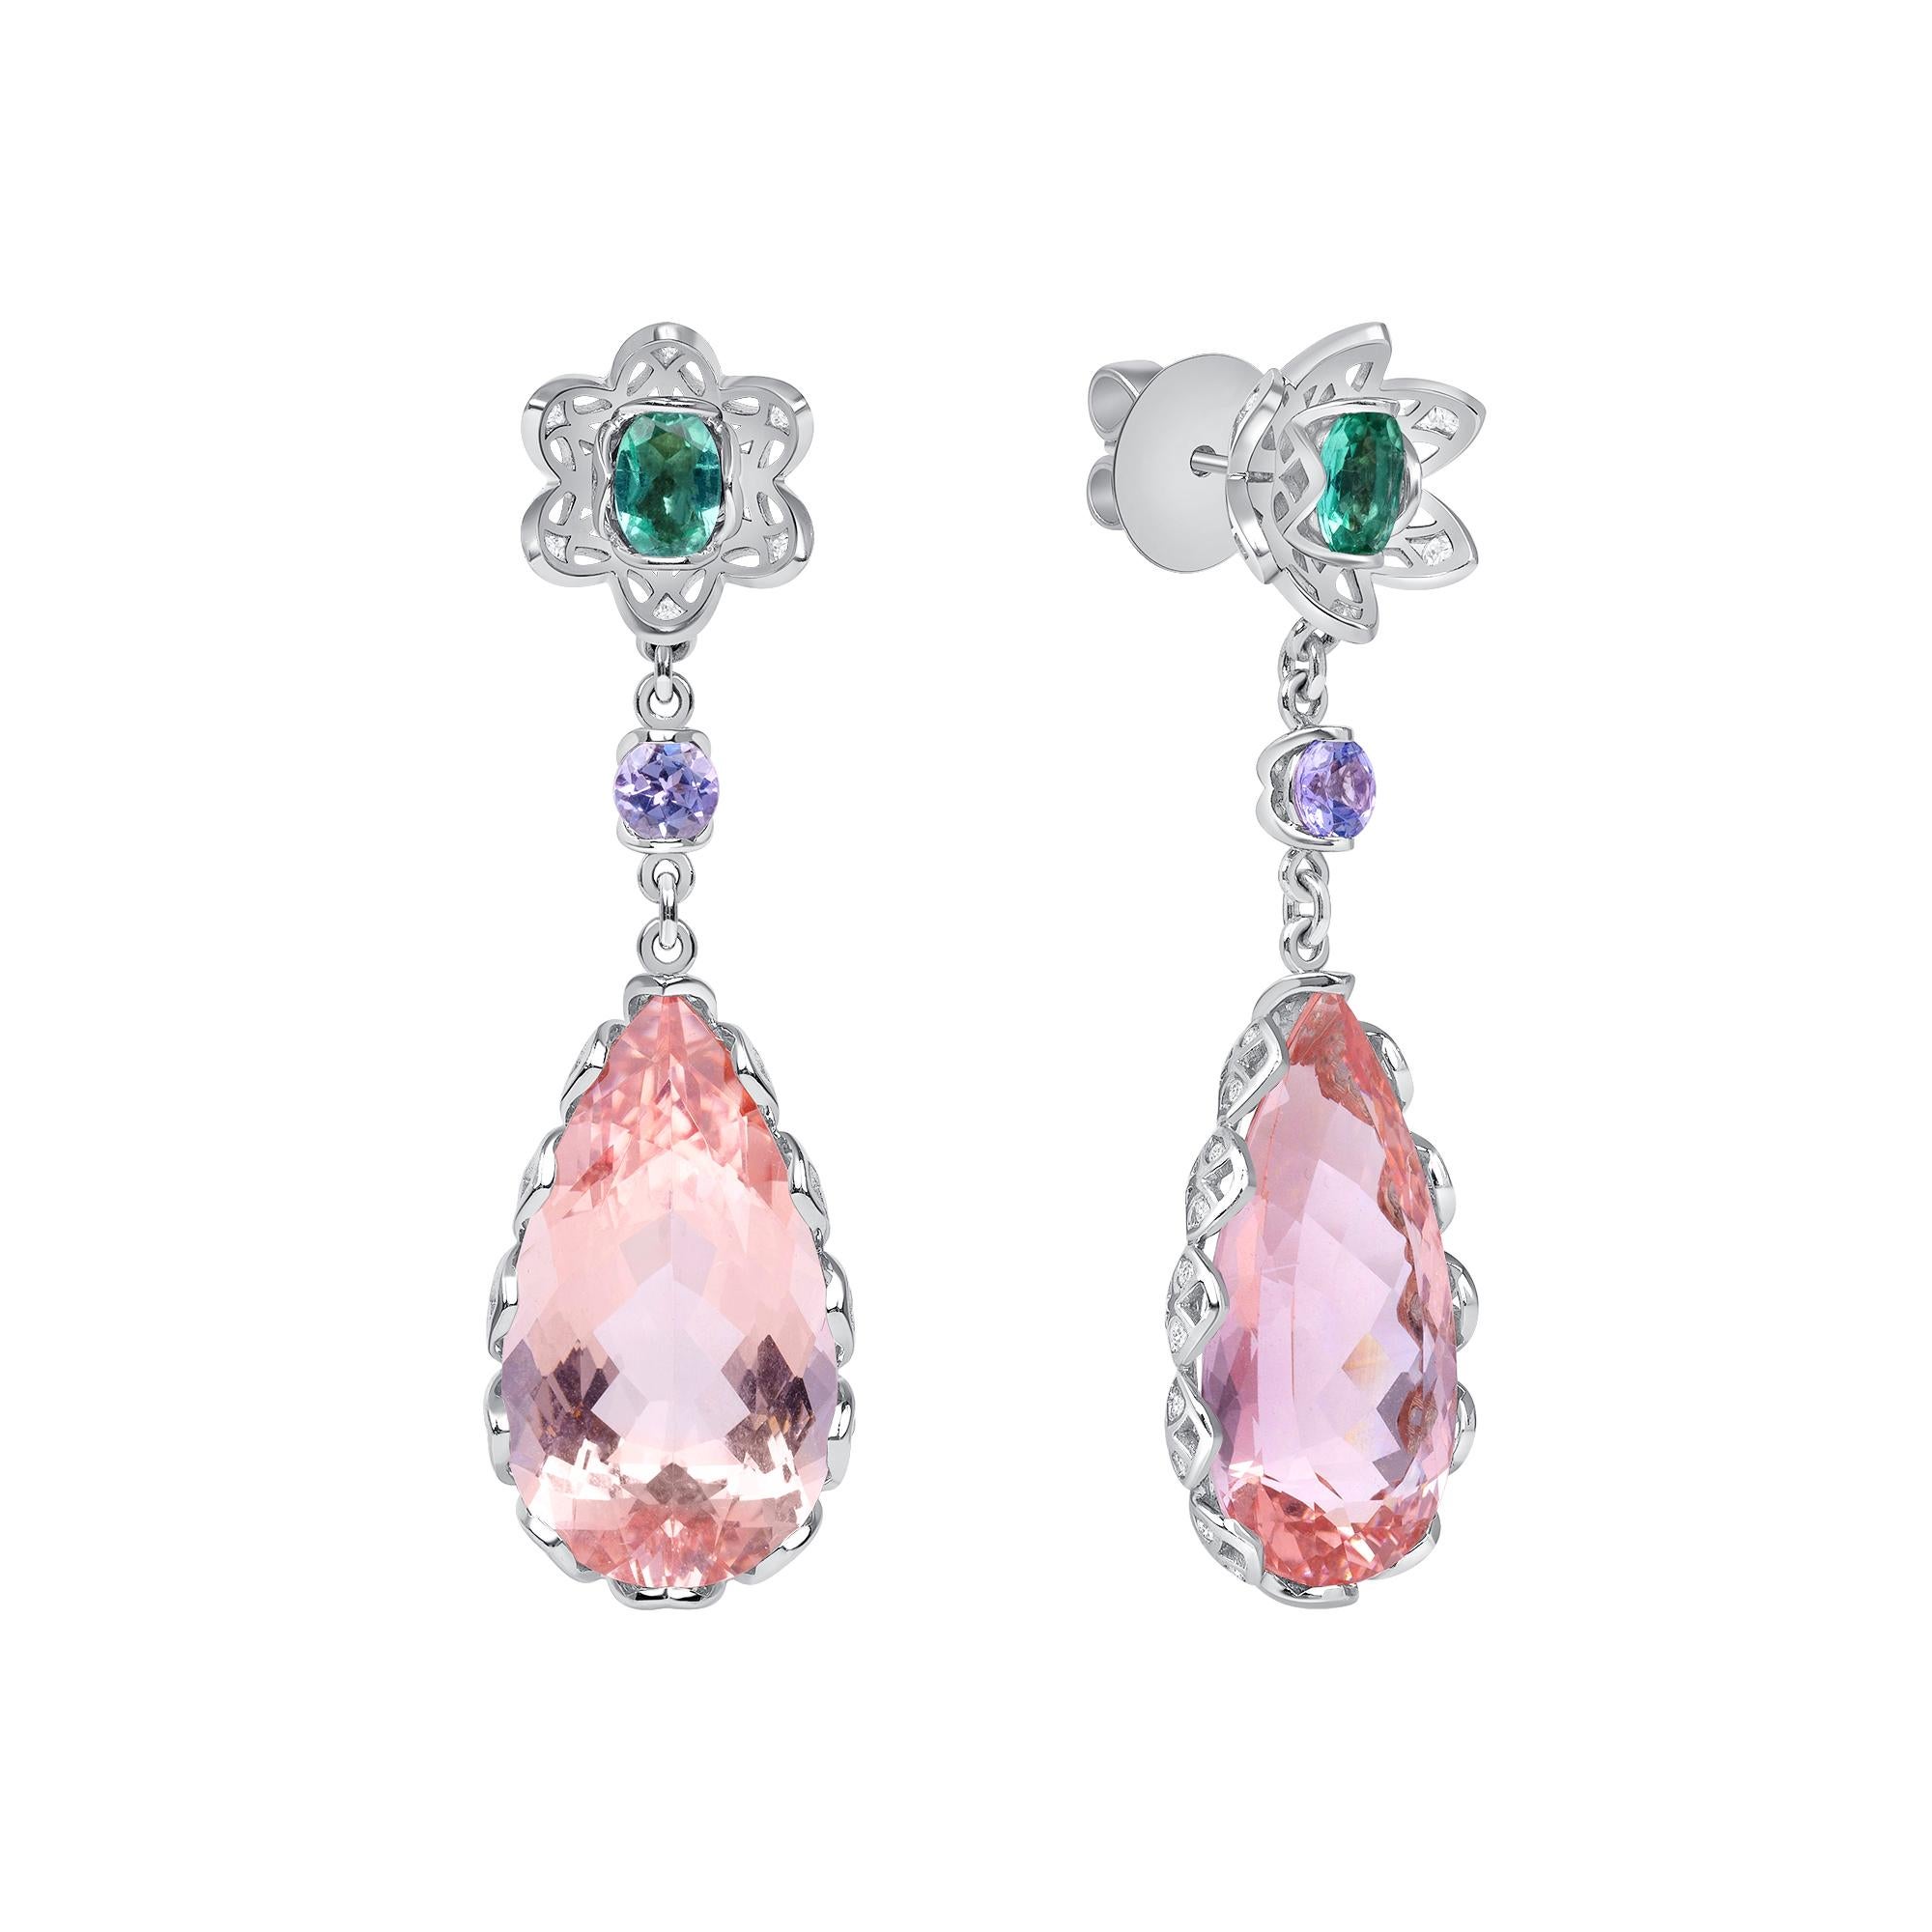 Morganite, Tourmaline, Amethyst, and Diamond Platinum Drop Earrings, in Stock.

These 23.9-carat total weight morganites, H, were specially cut in Brazil. The drop earrings also feature green Paraiba tourmaline (0.74-carat total weight), amethyst